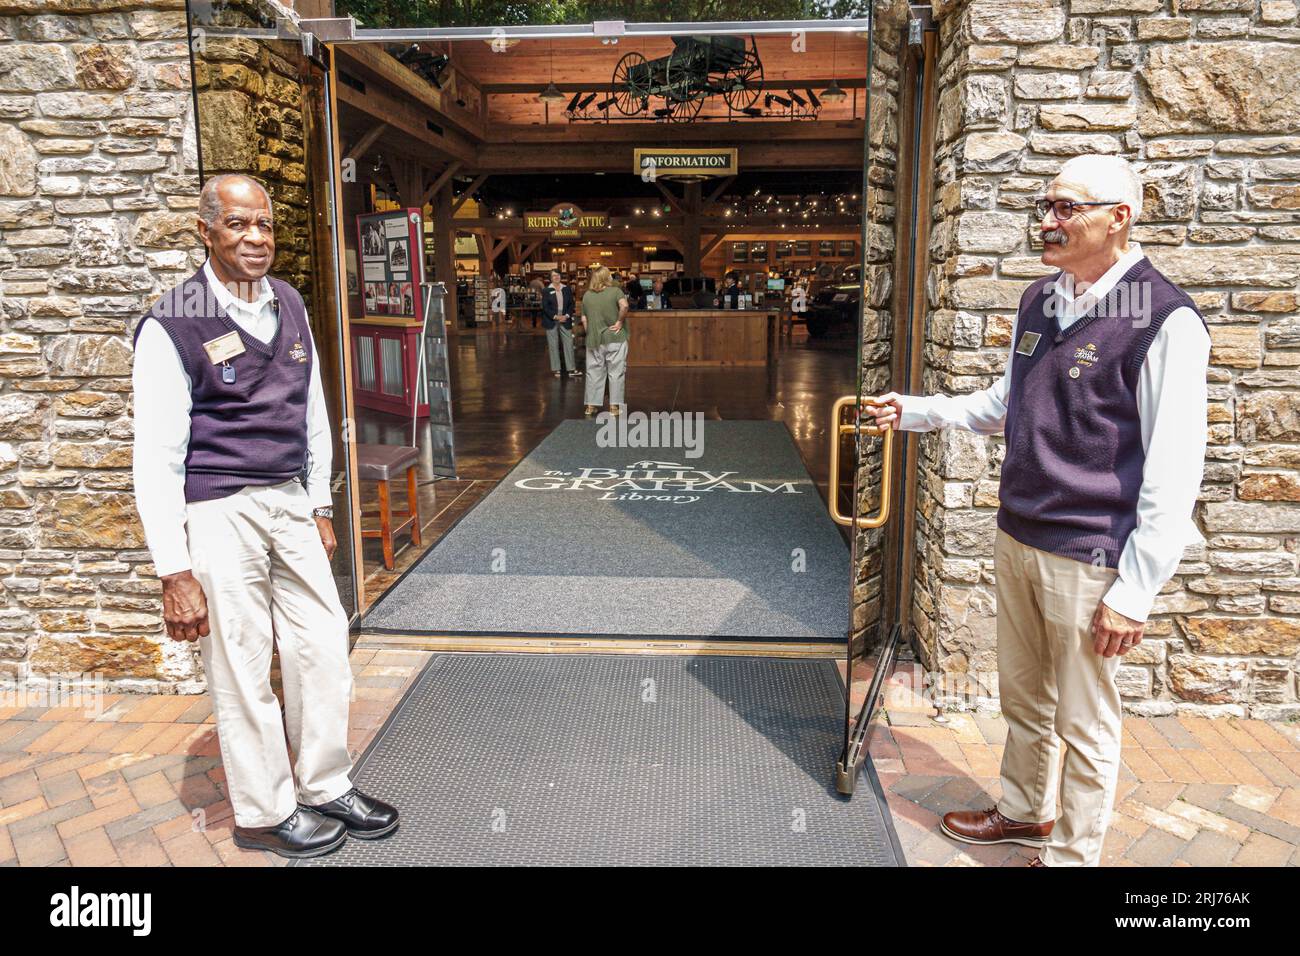 Charlotte North Carolina,Billy Graham Library,guides attendants,man men male,adults Black African,ethnic ethnicity,minority,outside exterior,building Stock Photo